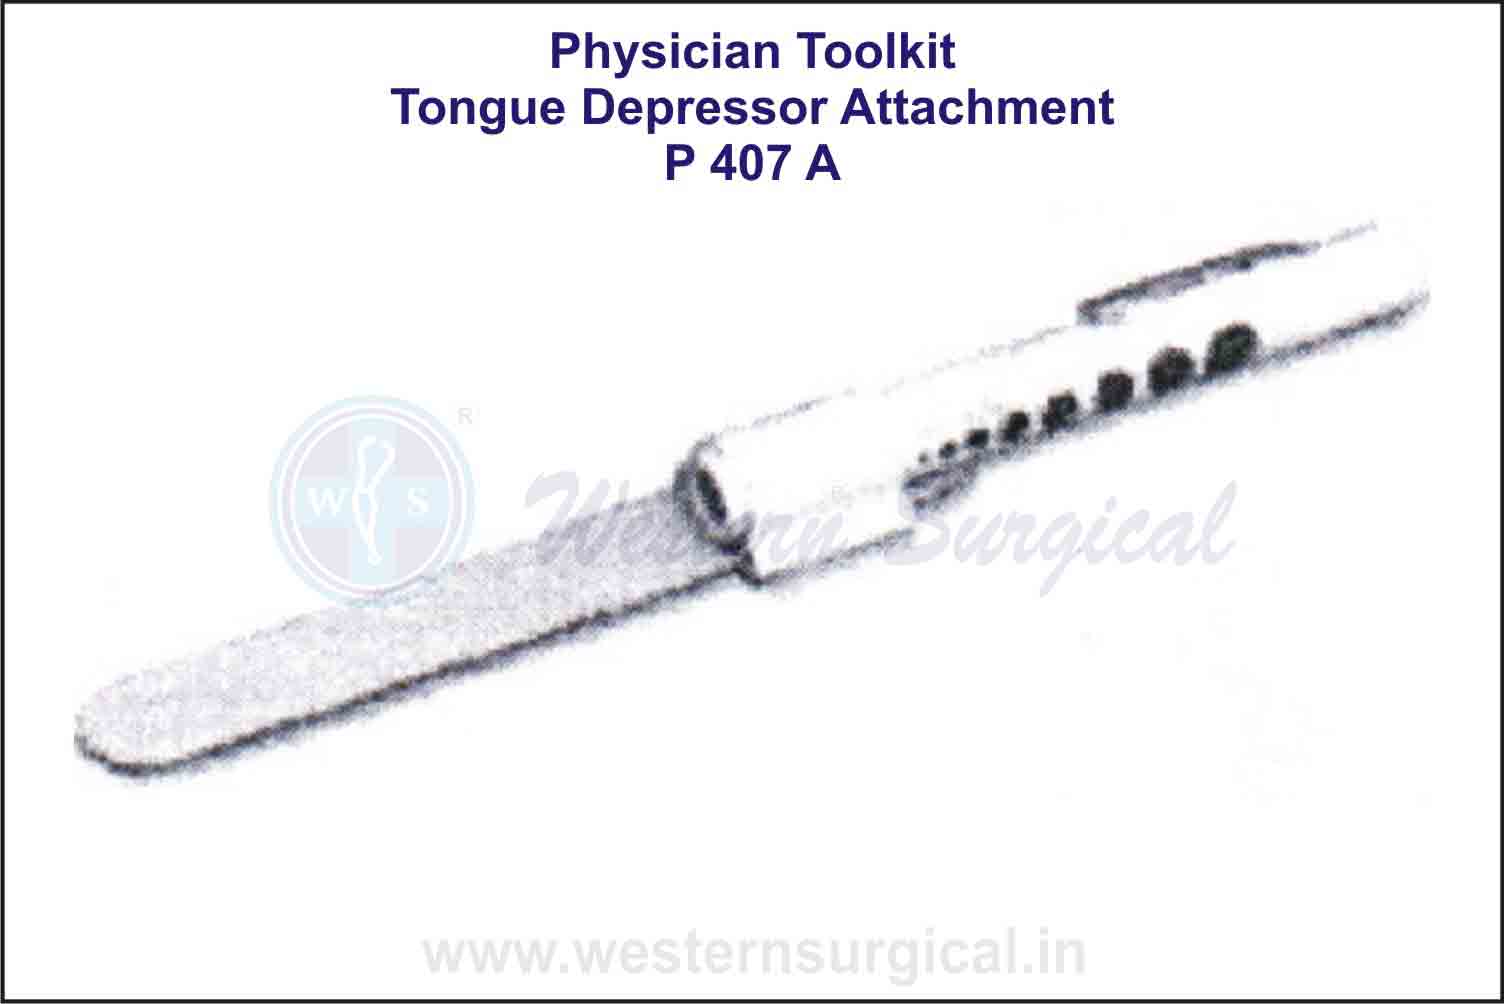 PHYSICIAN TOOLKIT(tongue depressor attachment)